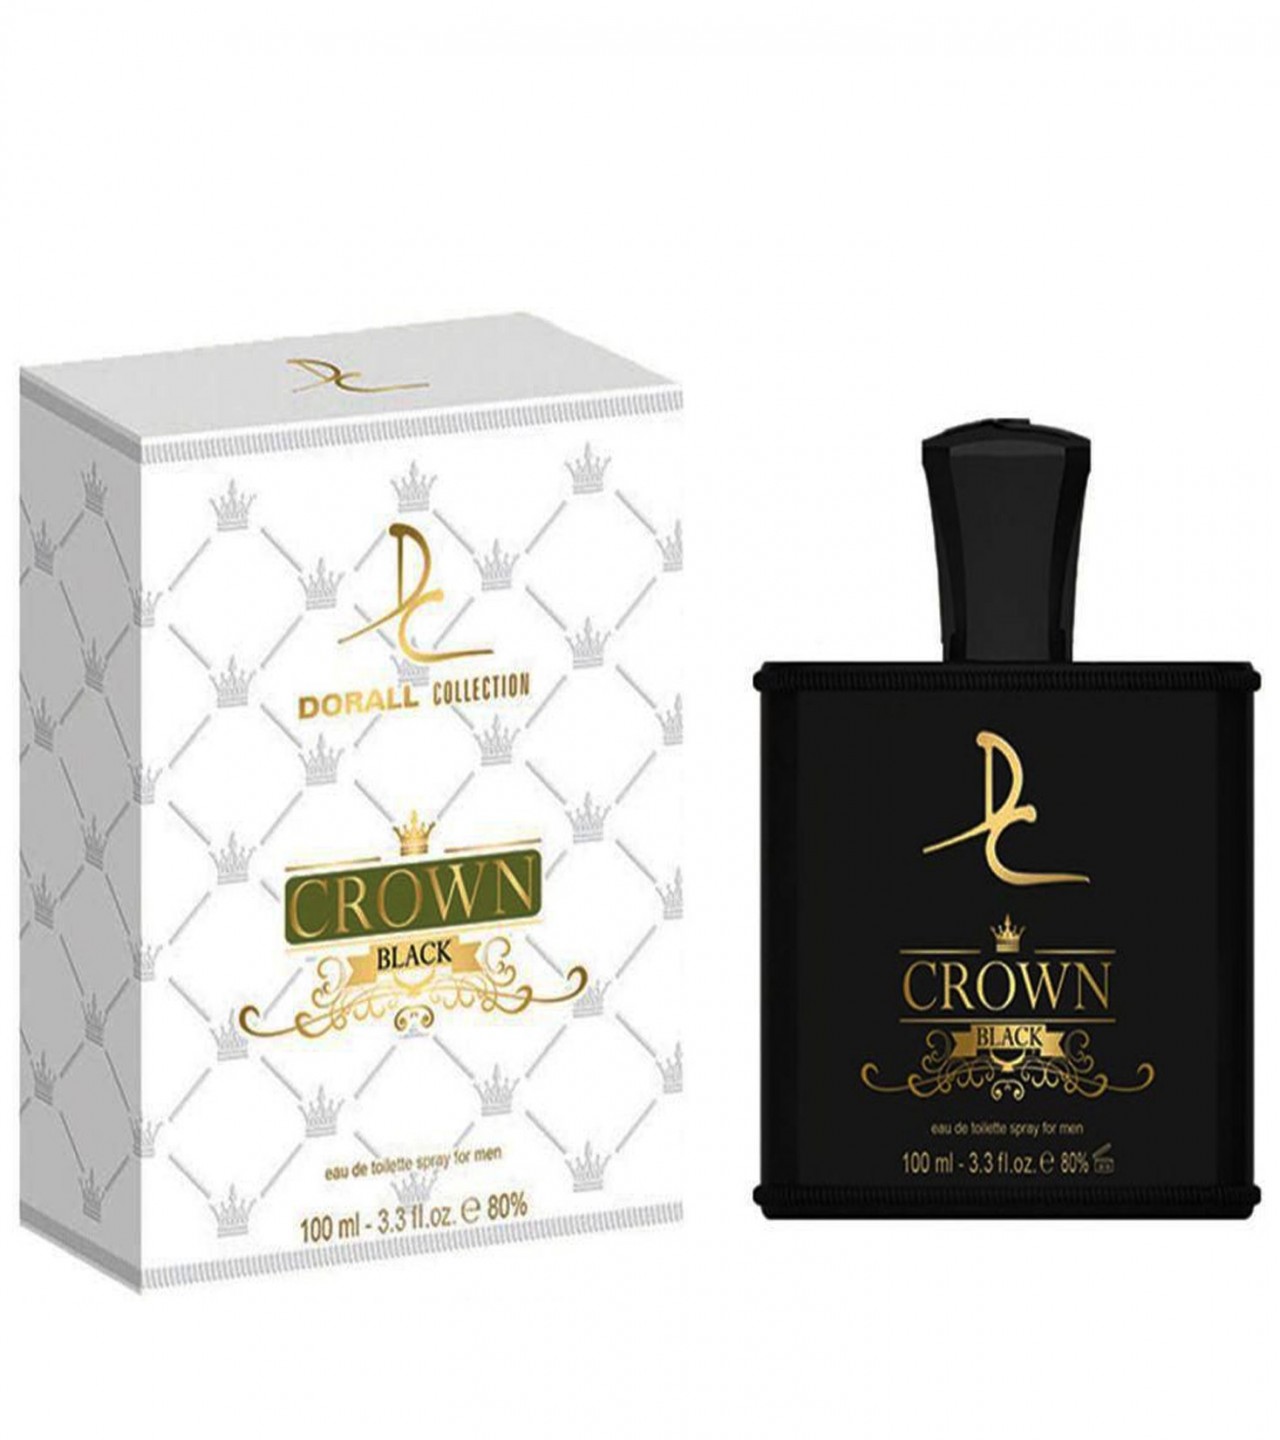 Dorall Collection Crown Black Perfume For Men – 100 ml